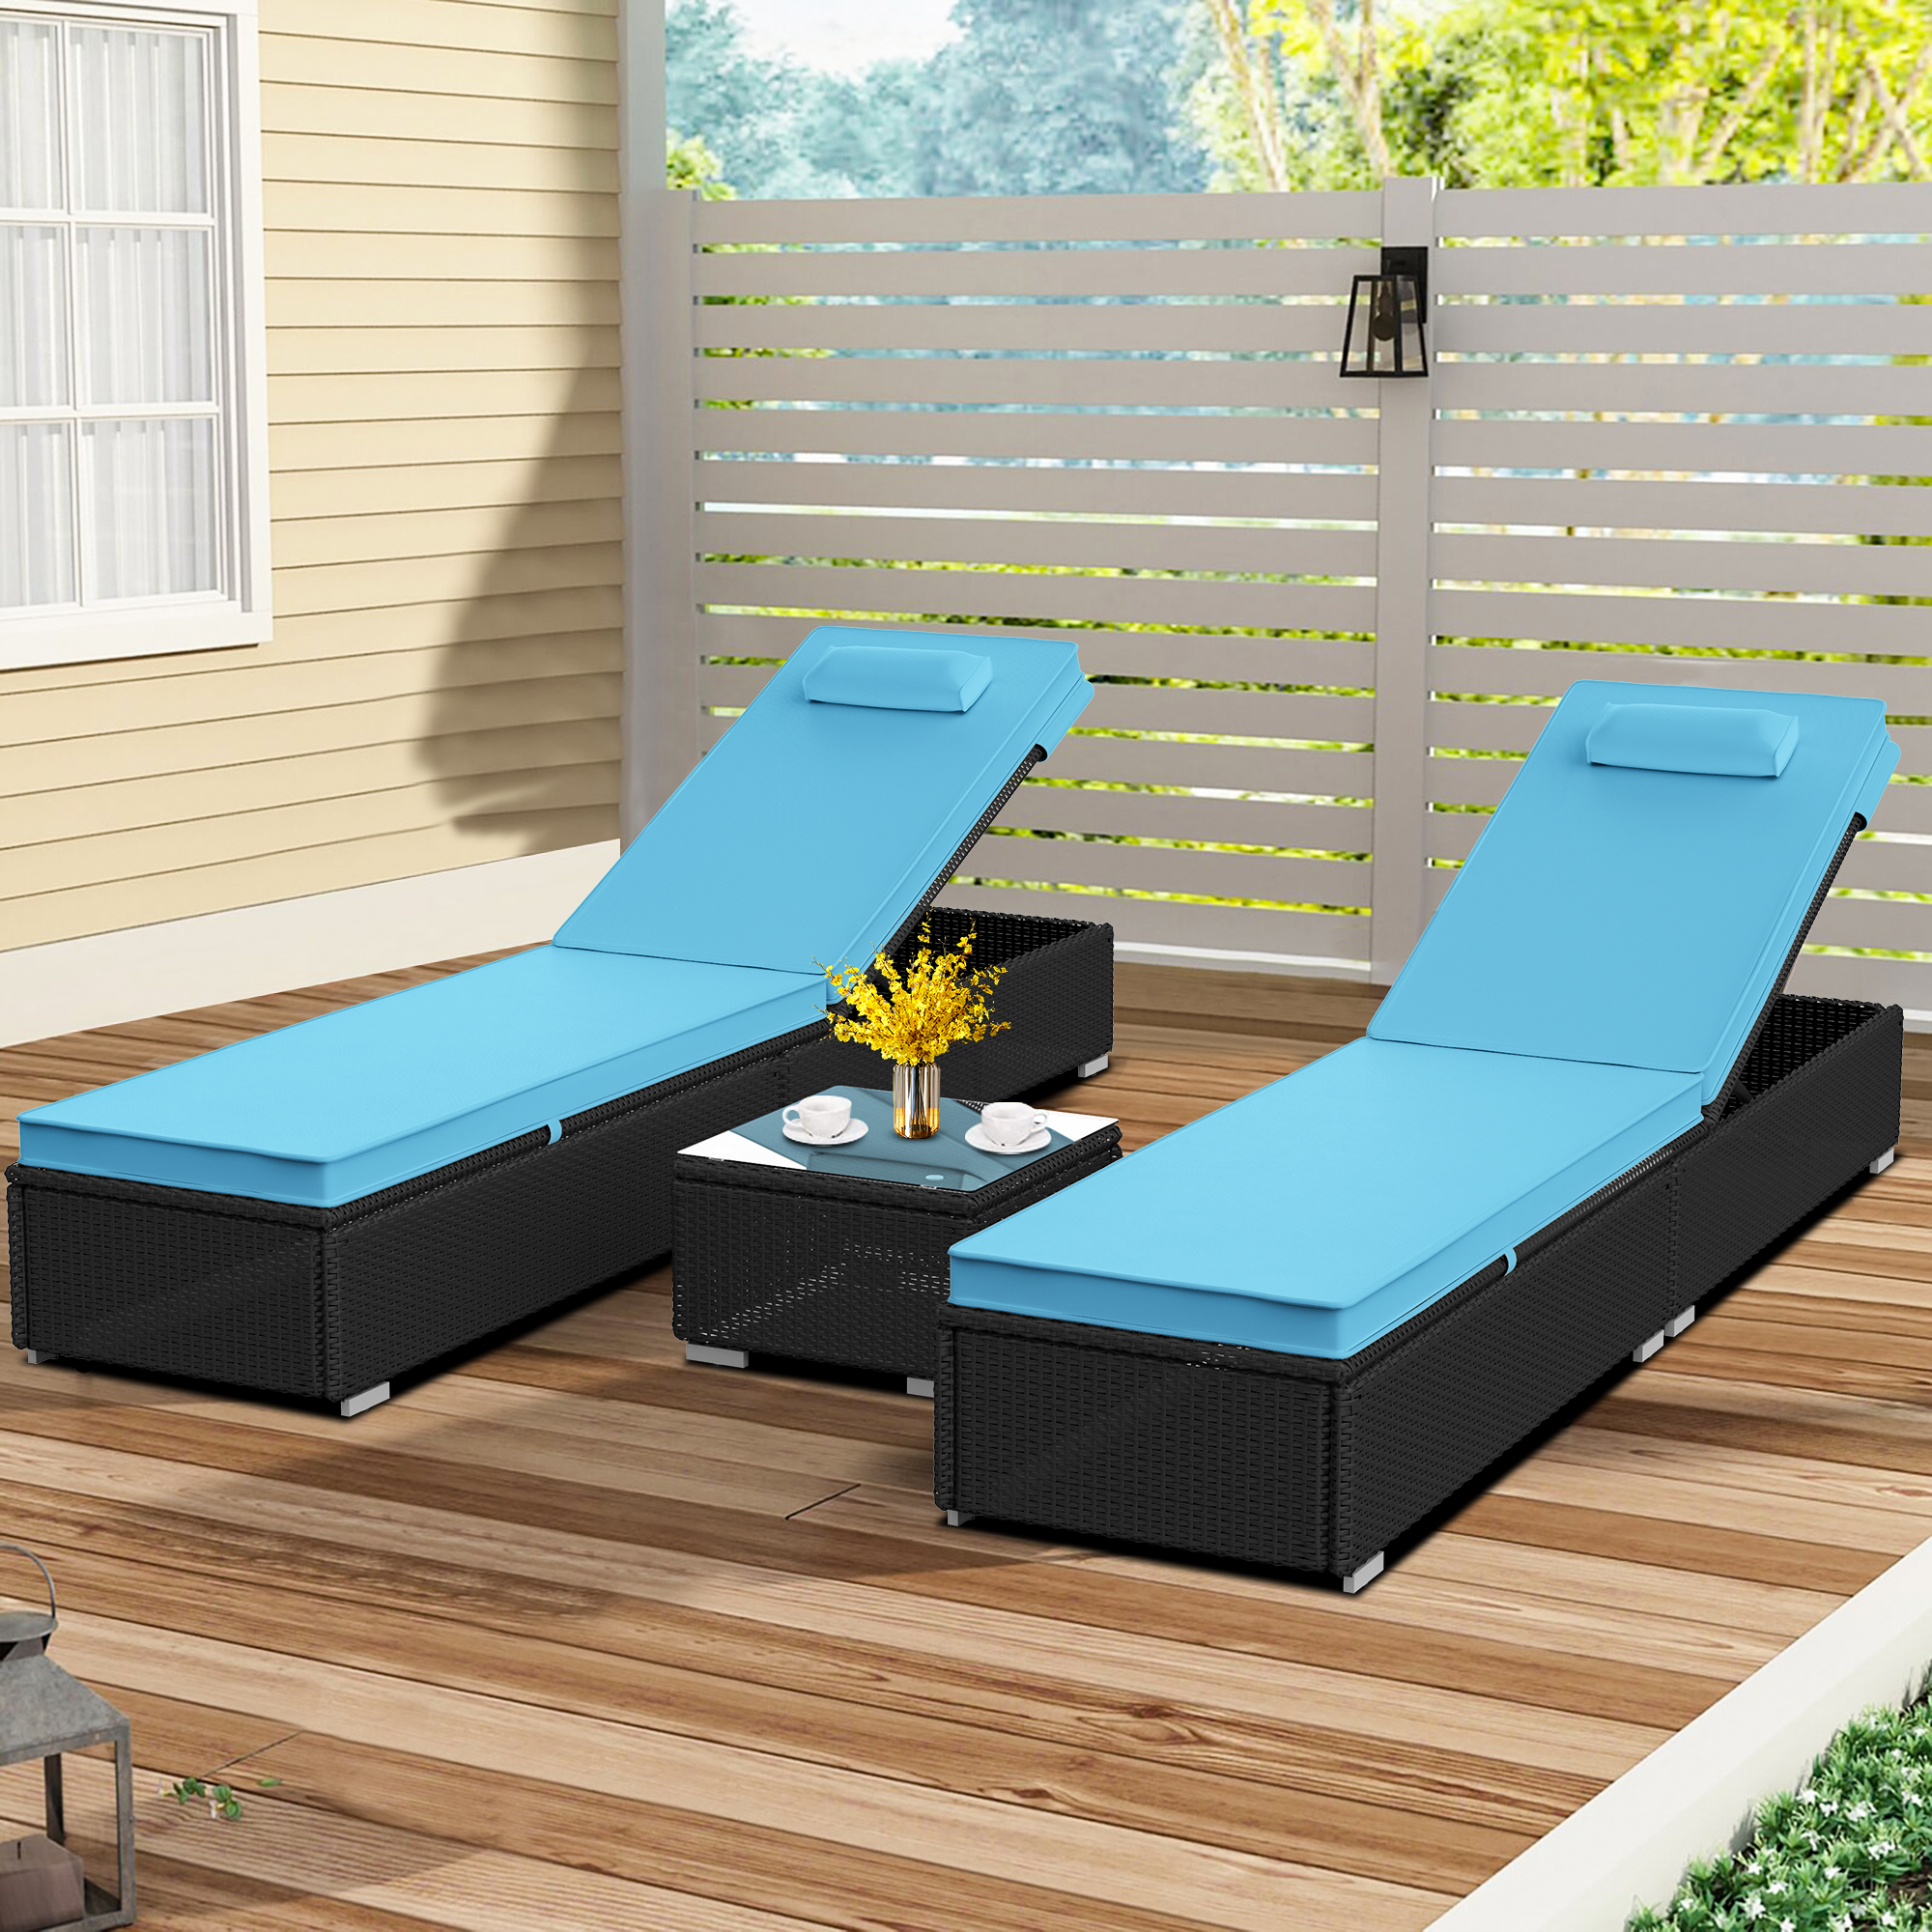 Chaise Lounge Set, Outdoor Lounge Chair with 5 Backrest Angles and Coffee Table, Elegant Chaise Lounge Chair, Patio Reclining Chairs Furniture for Poolside, Deck, Backyard, JA2910 - image 1 of 7